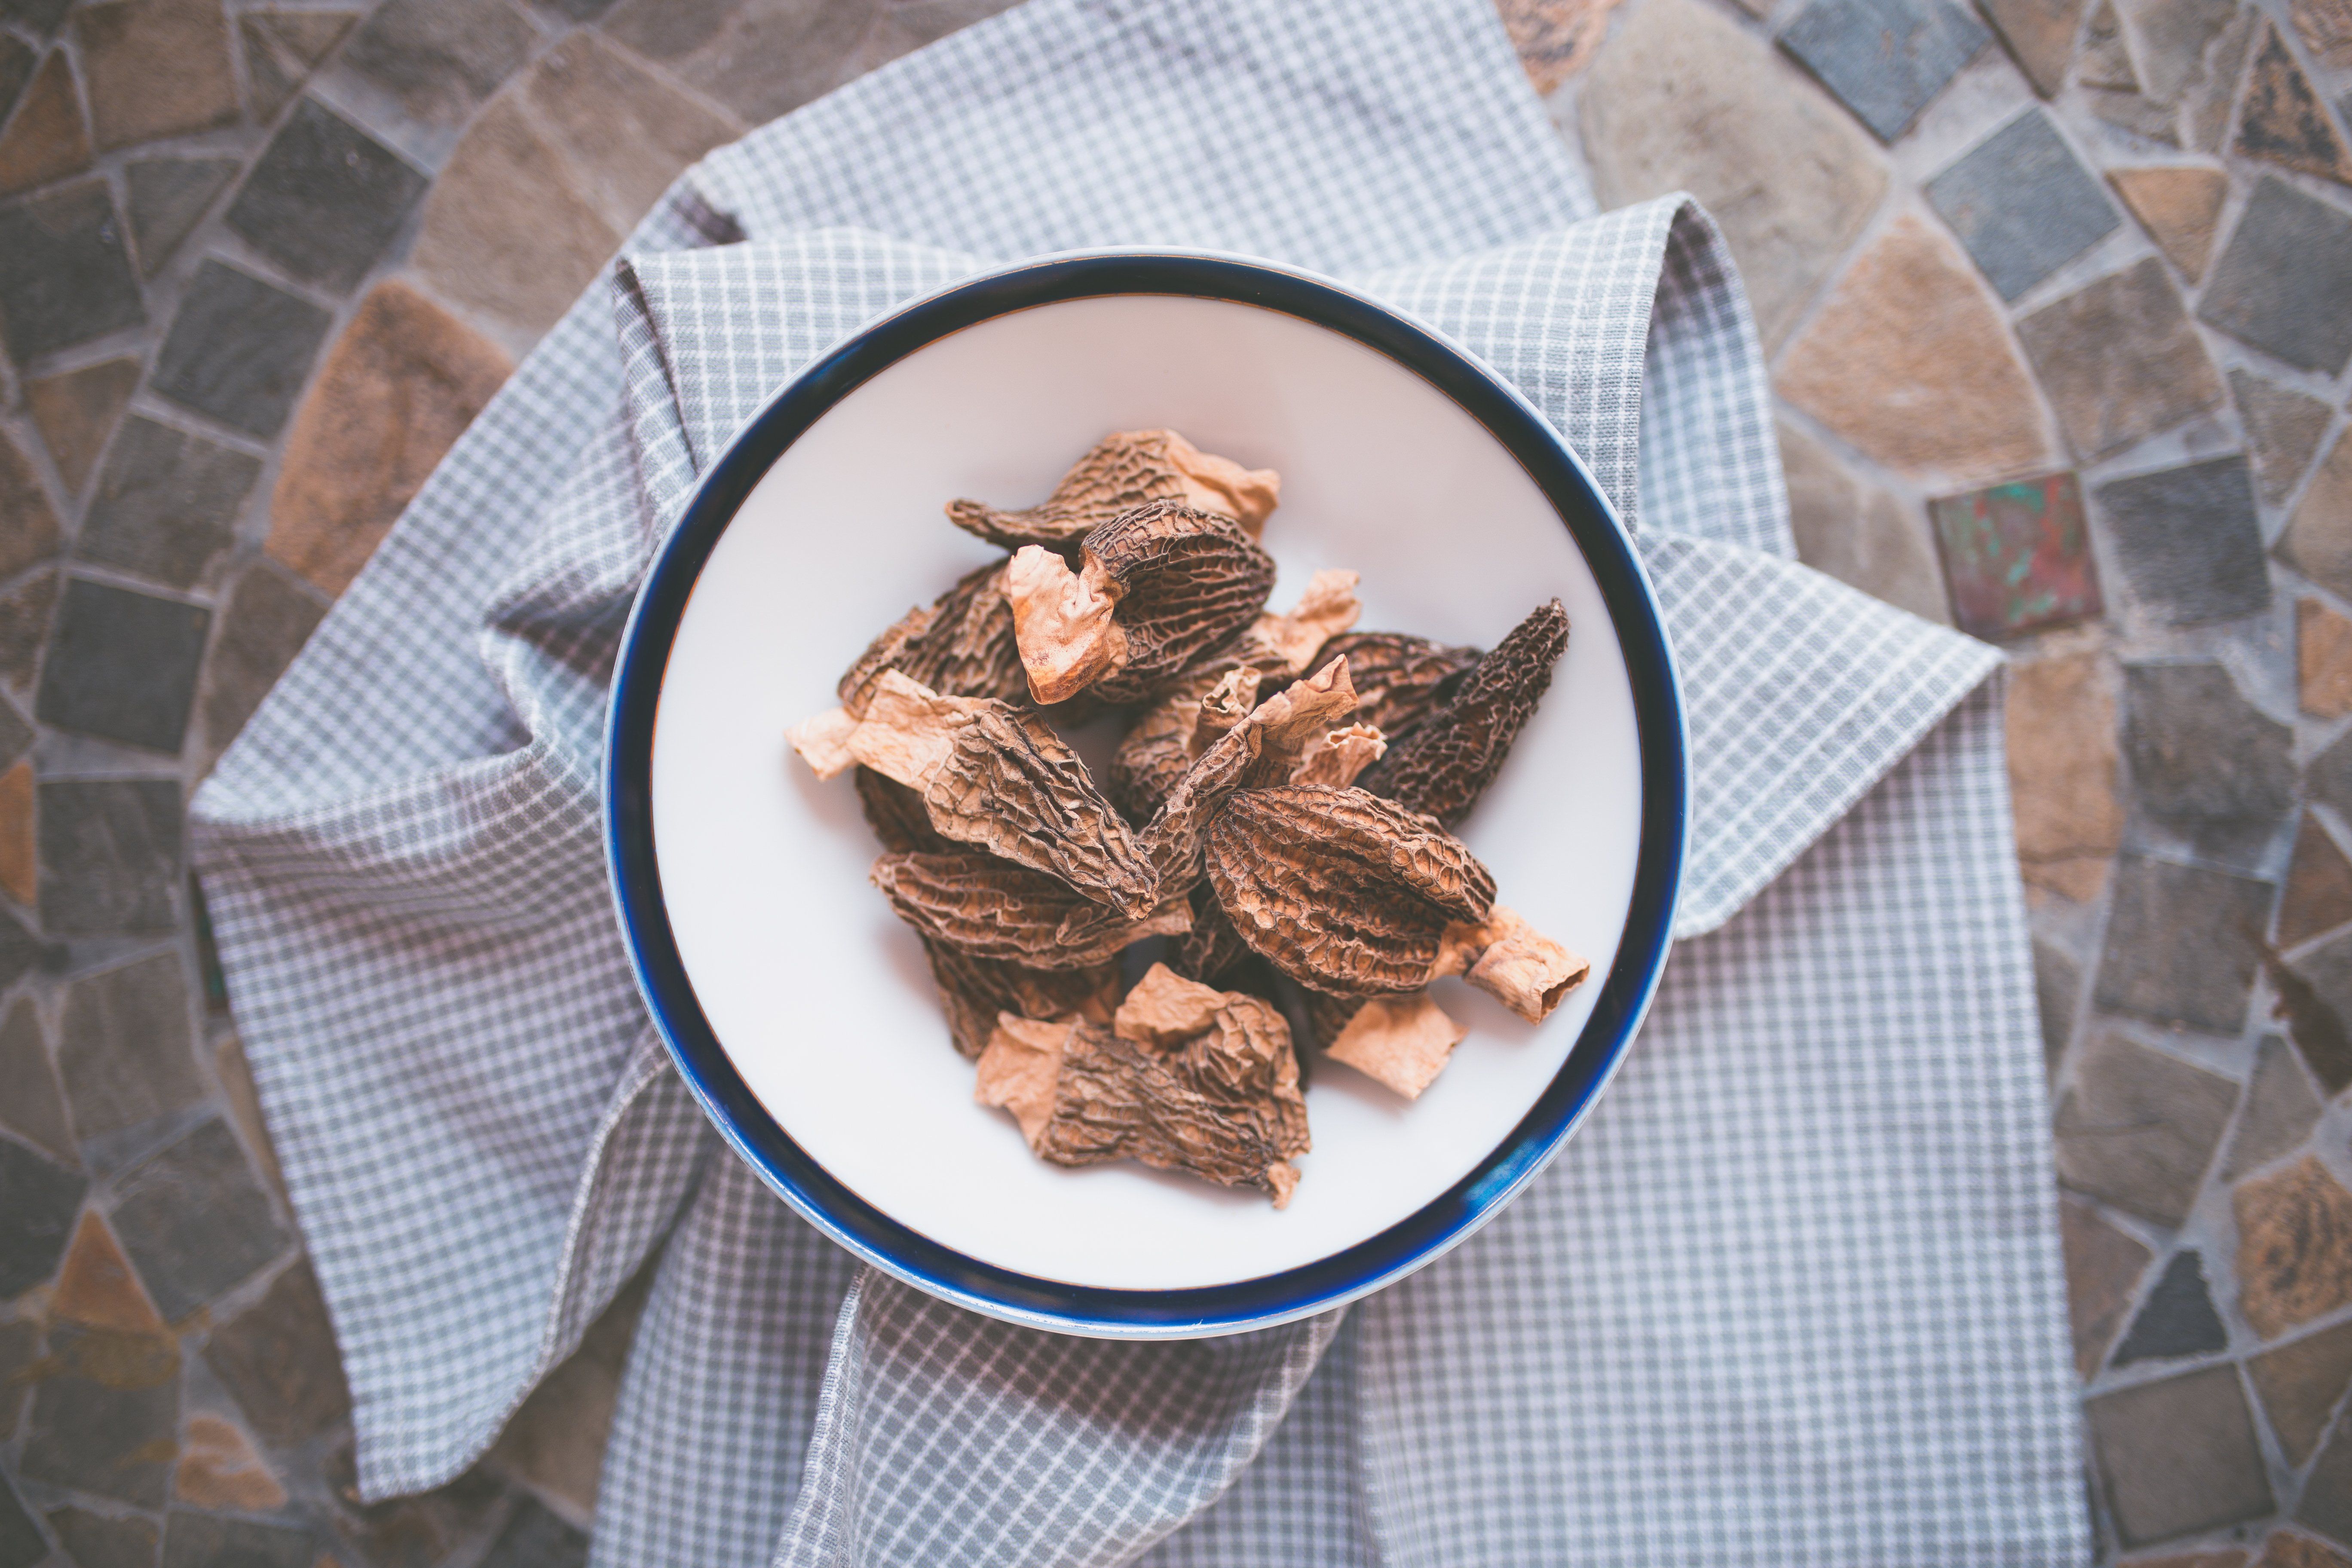 https://www.slofoodgroup.com/cdn/shop/articles/dried-morel-mushrooms-top-tips-for-preparing-and-cooking-them-417657_5472x.jpg?v=1631040464